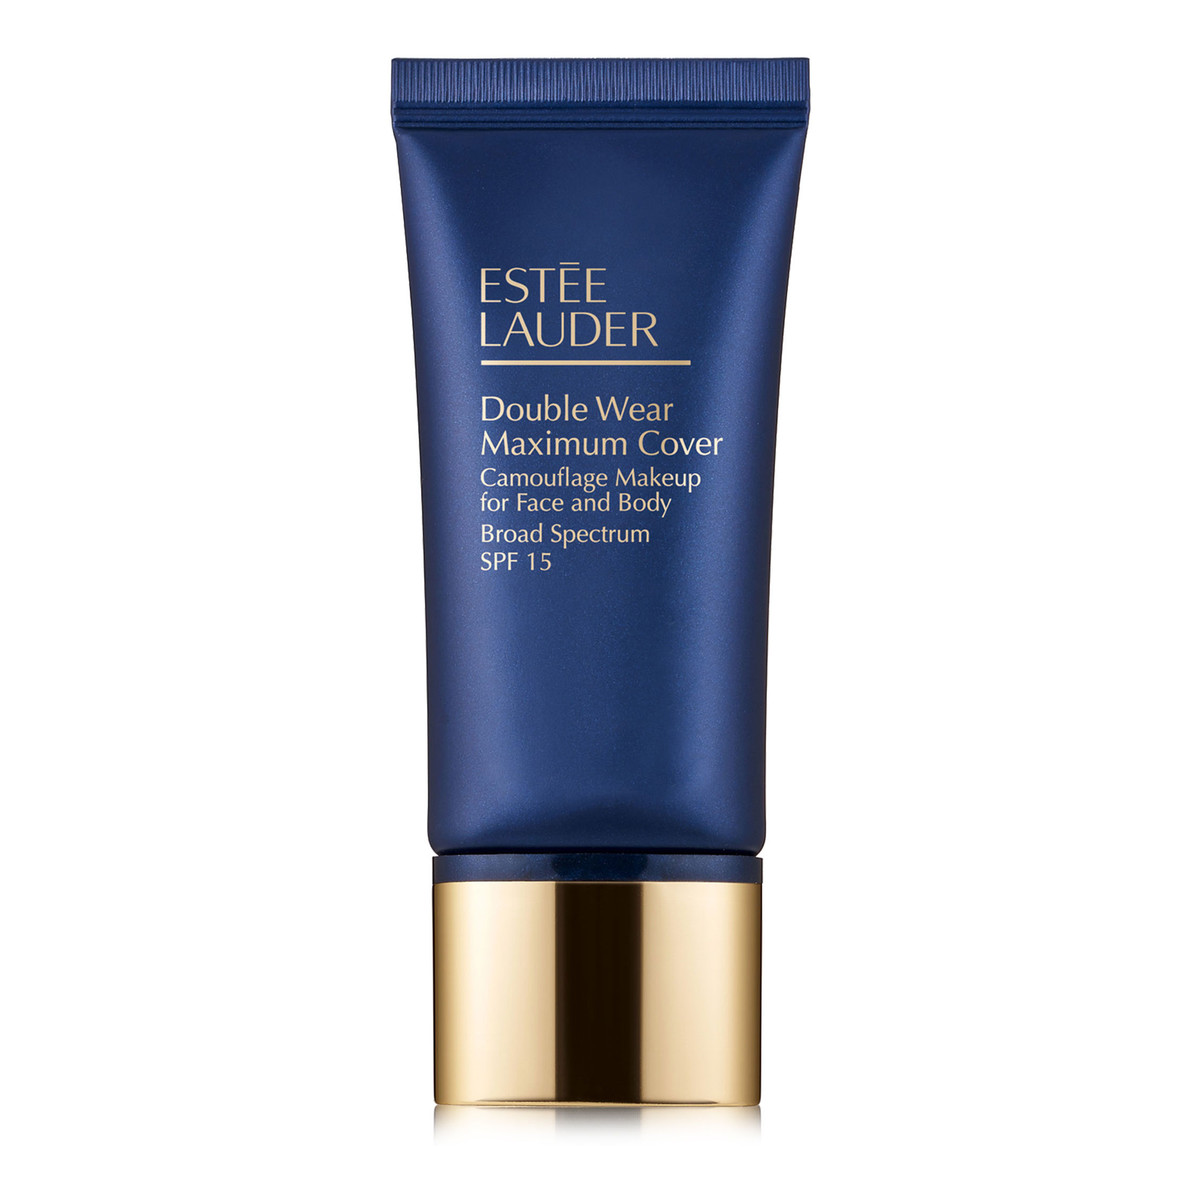 Estee Lauder Double Wear Maximum Cover Camouflage Makeup For Face And Body podkład kryjący SPF15 30ml